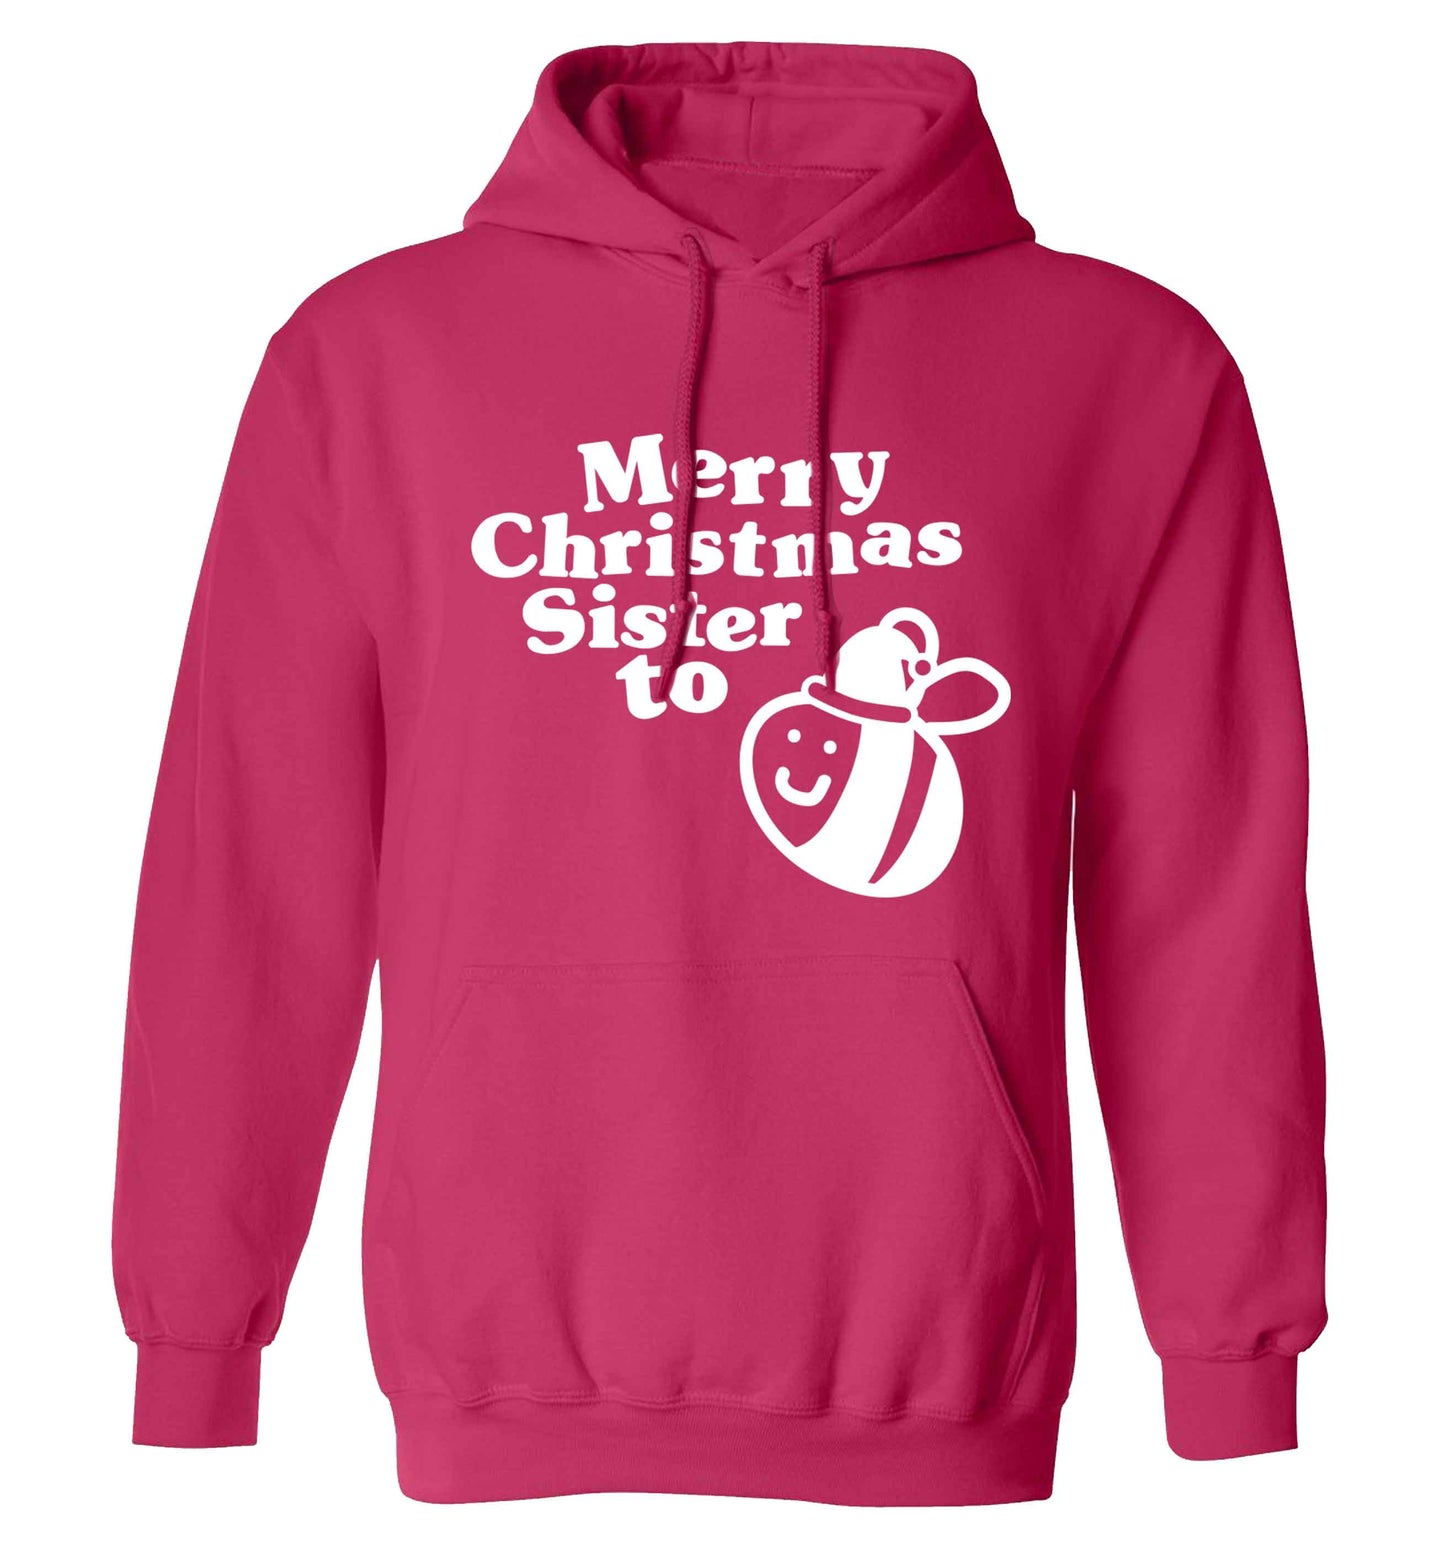 Merry Christmas sister to be adults unisex pink hoodie 2XL